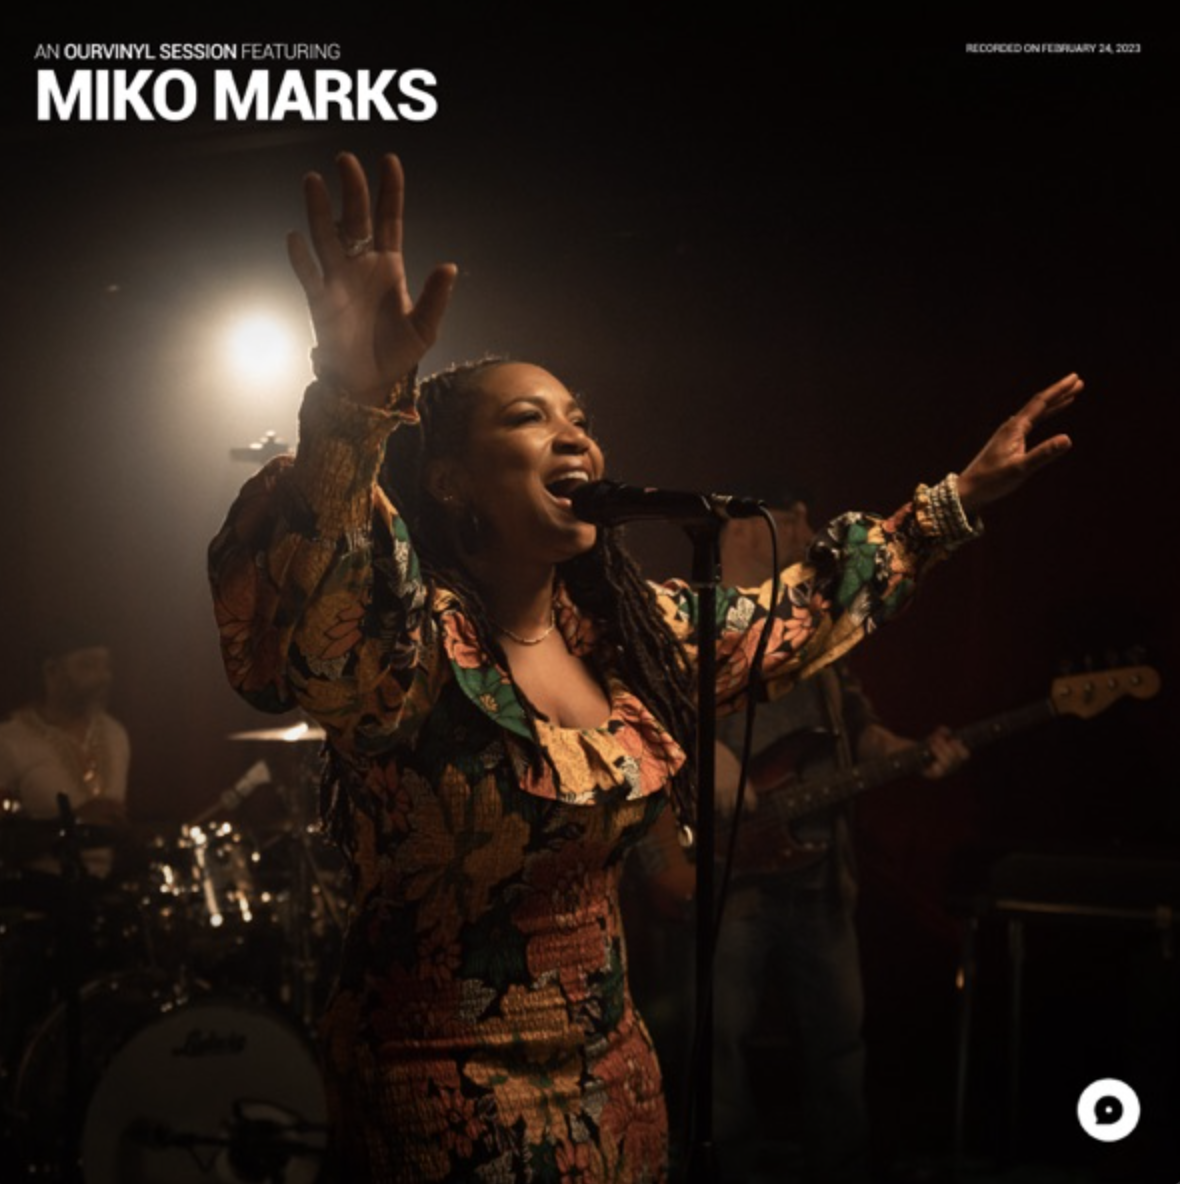 Art for Feel Like Going Home (OurVinyl Sessions) by Miko Marks & OurVinyl